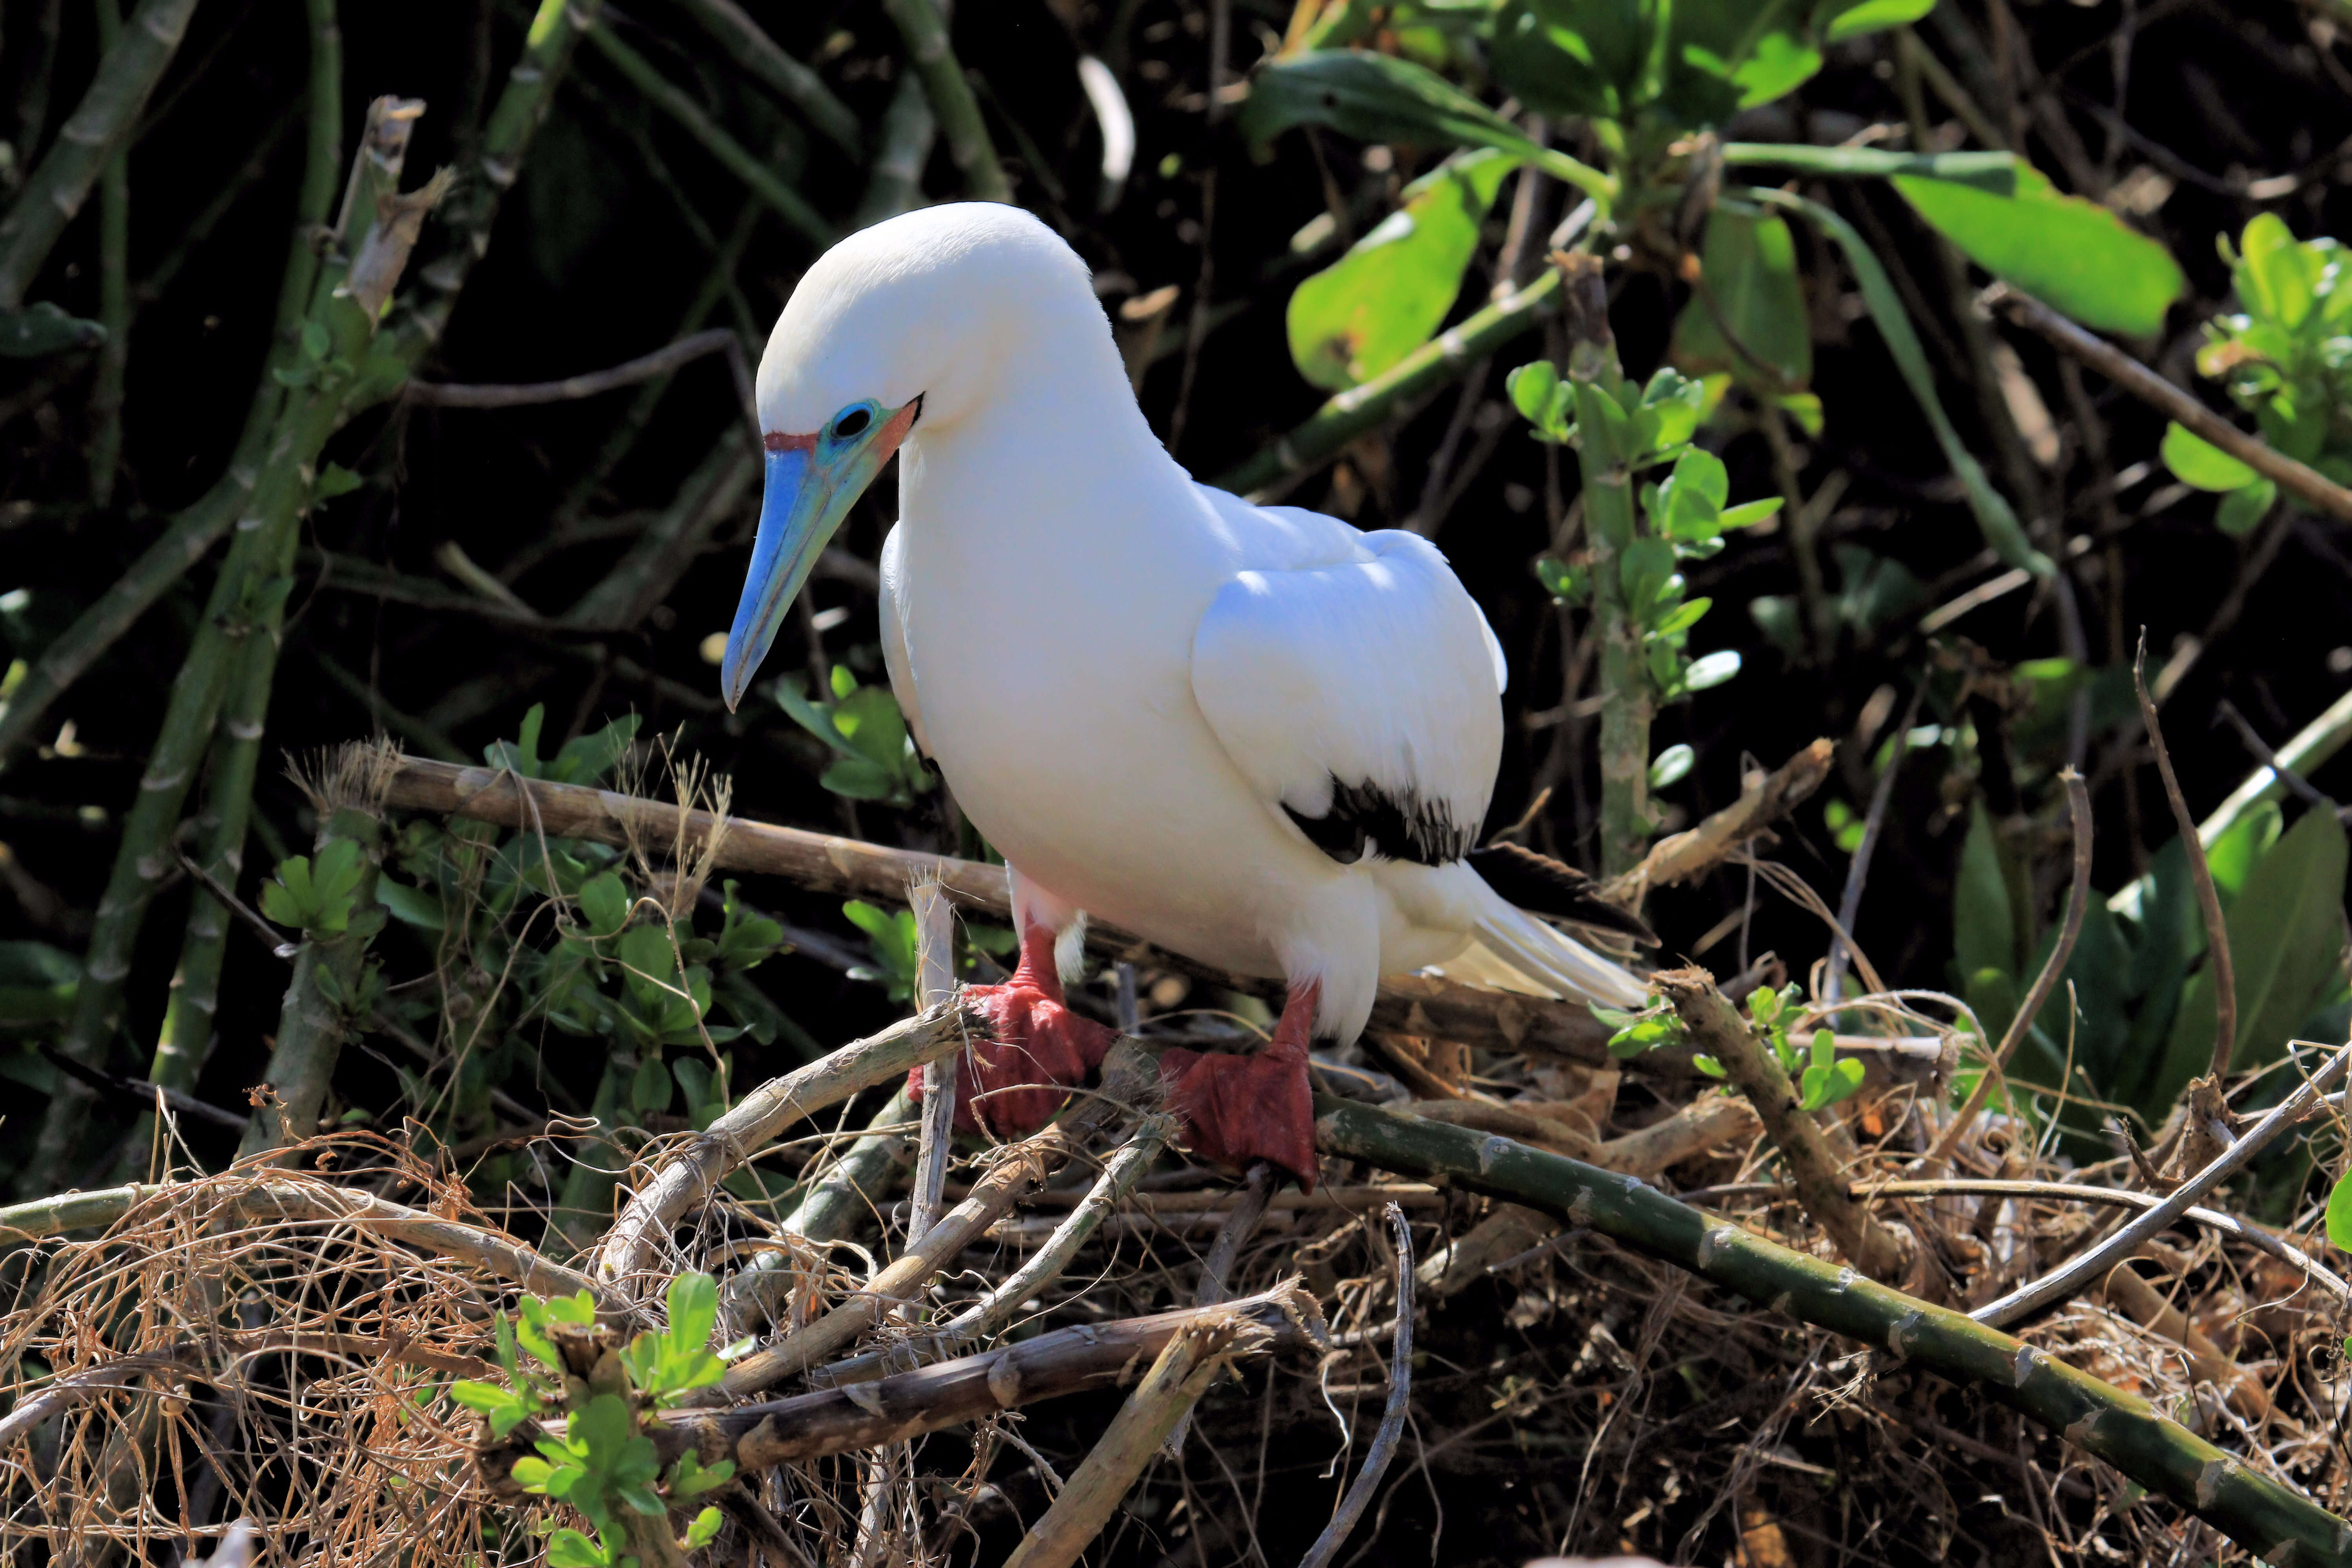 Image of Red-footed Booby